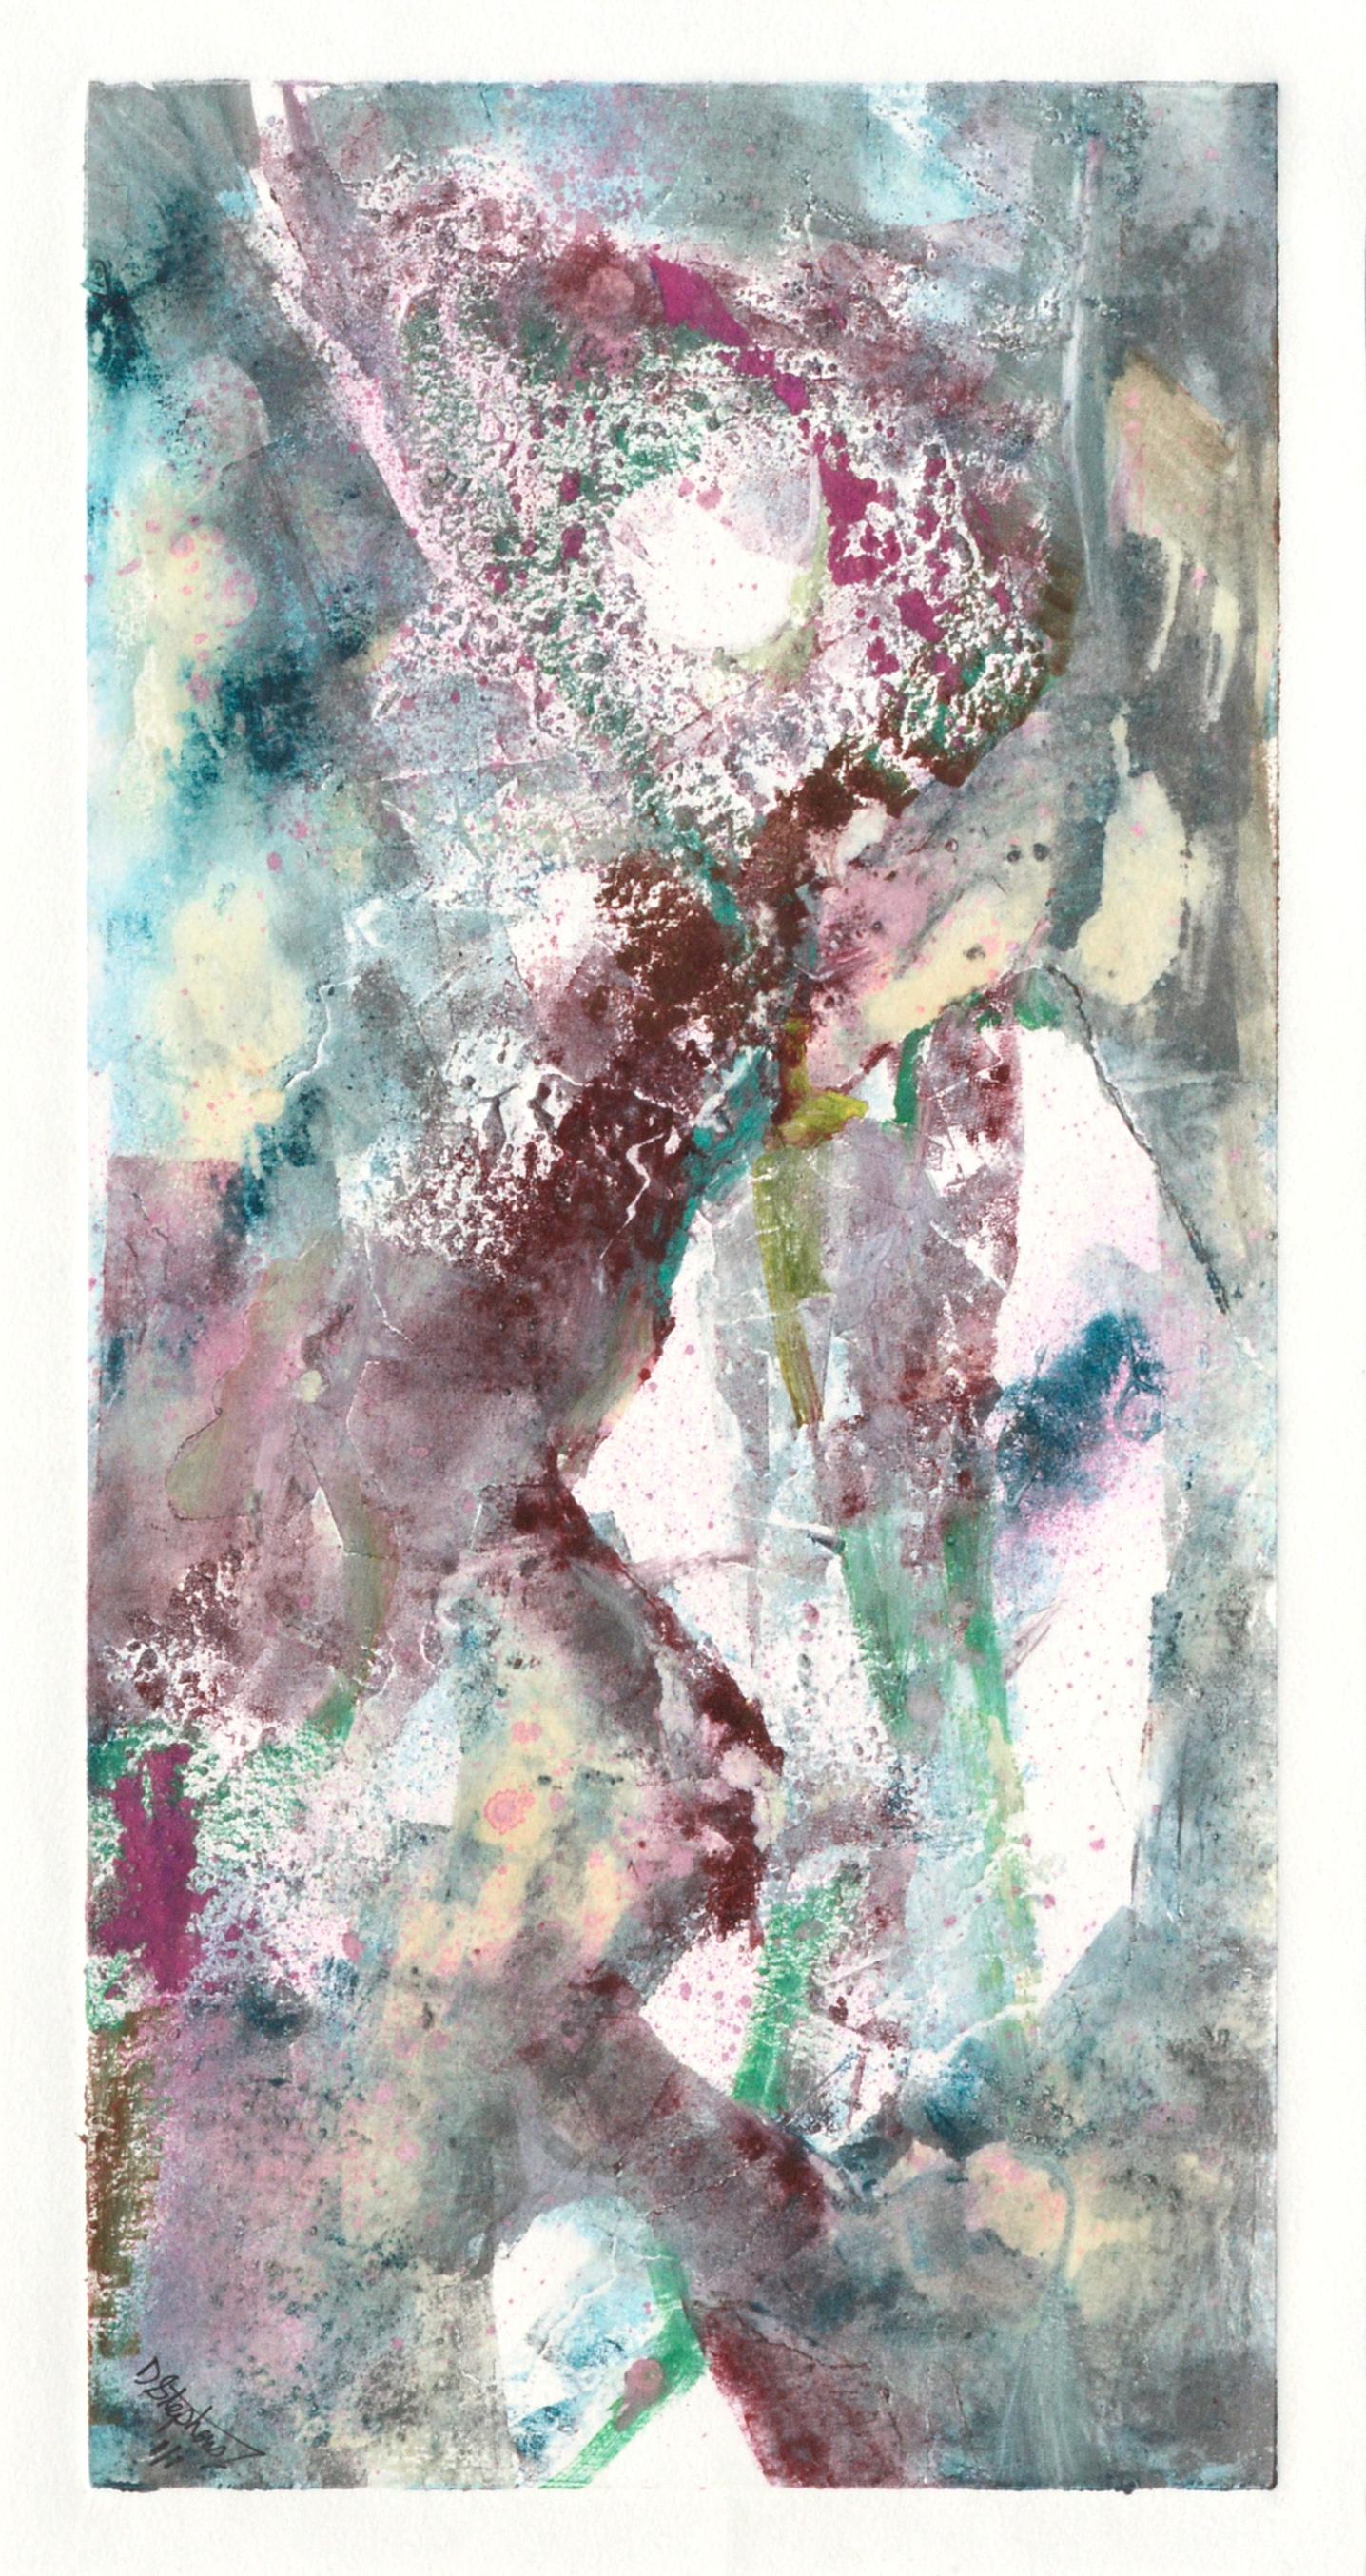 Magenta and Teal Abstracted Figurative Textured Monoprint - Painting by David Stephens